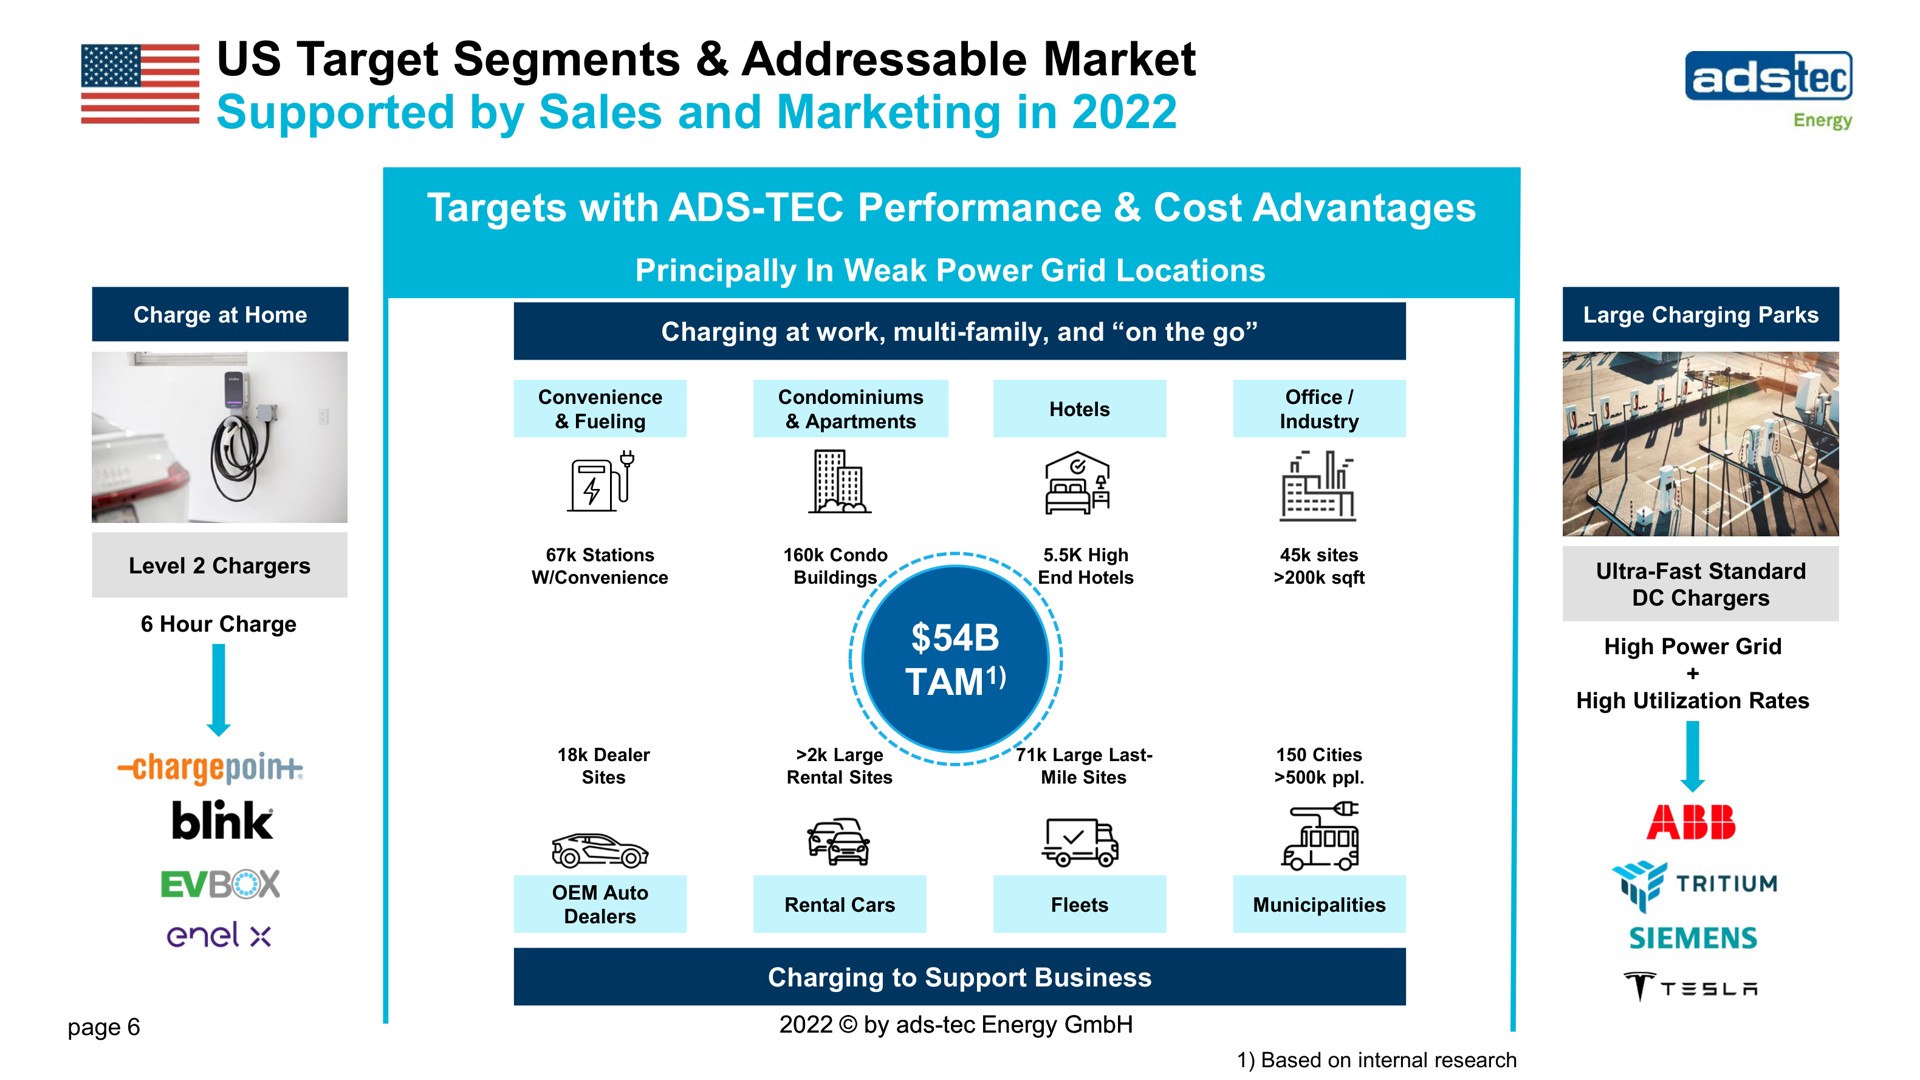 us target segments market supported by sales and marketing in a blink a a abb i | ads-tec Energy